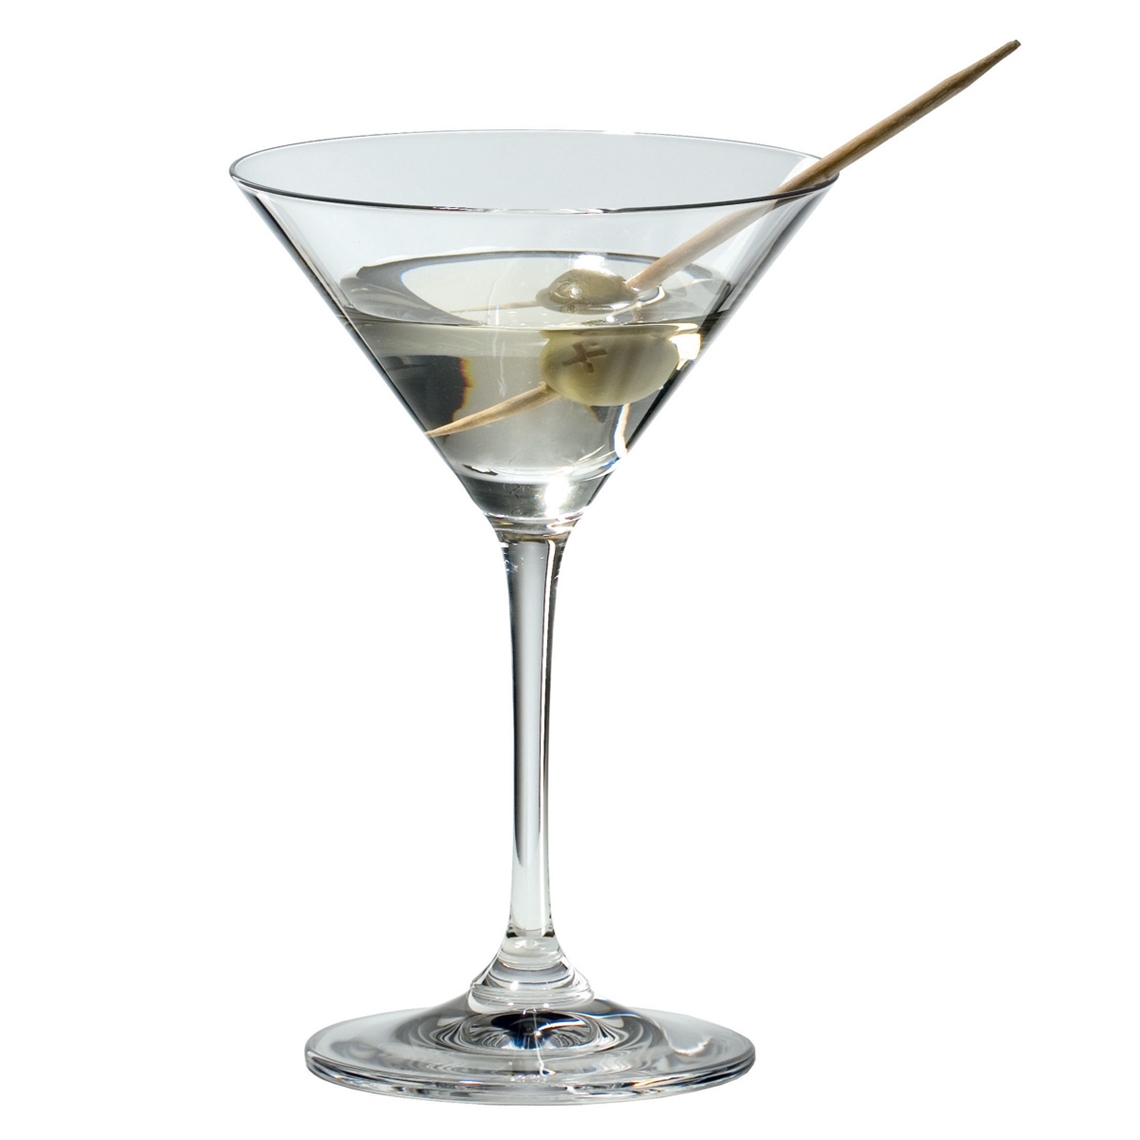 View more large wine glasses from our Martini Glasses range